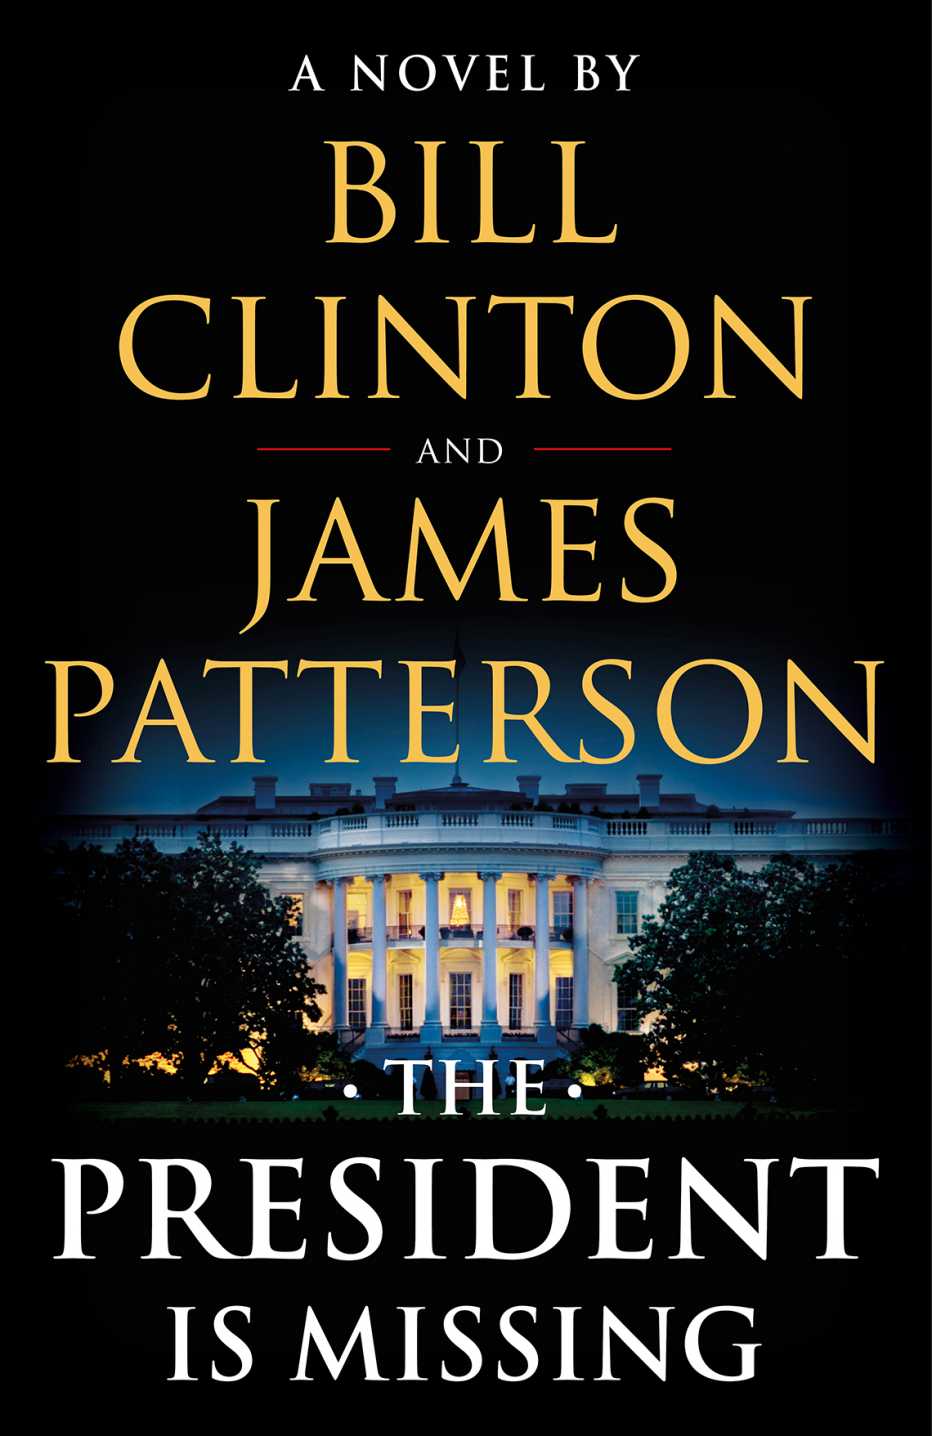 Book cover, text reads: A NOVEL BY BILL CLINTON AND JAMES PATTERSON, THE PRESIDENT IS MISSING